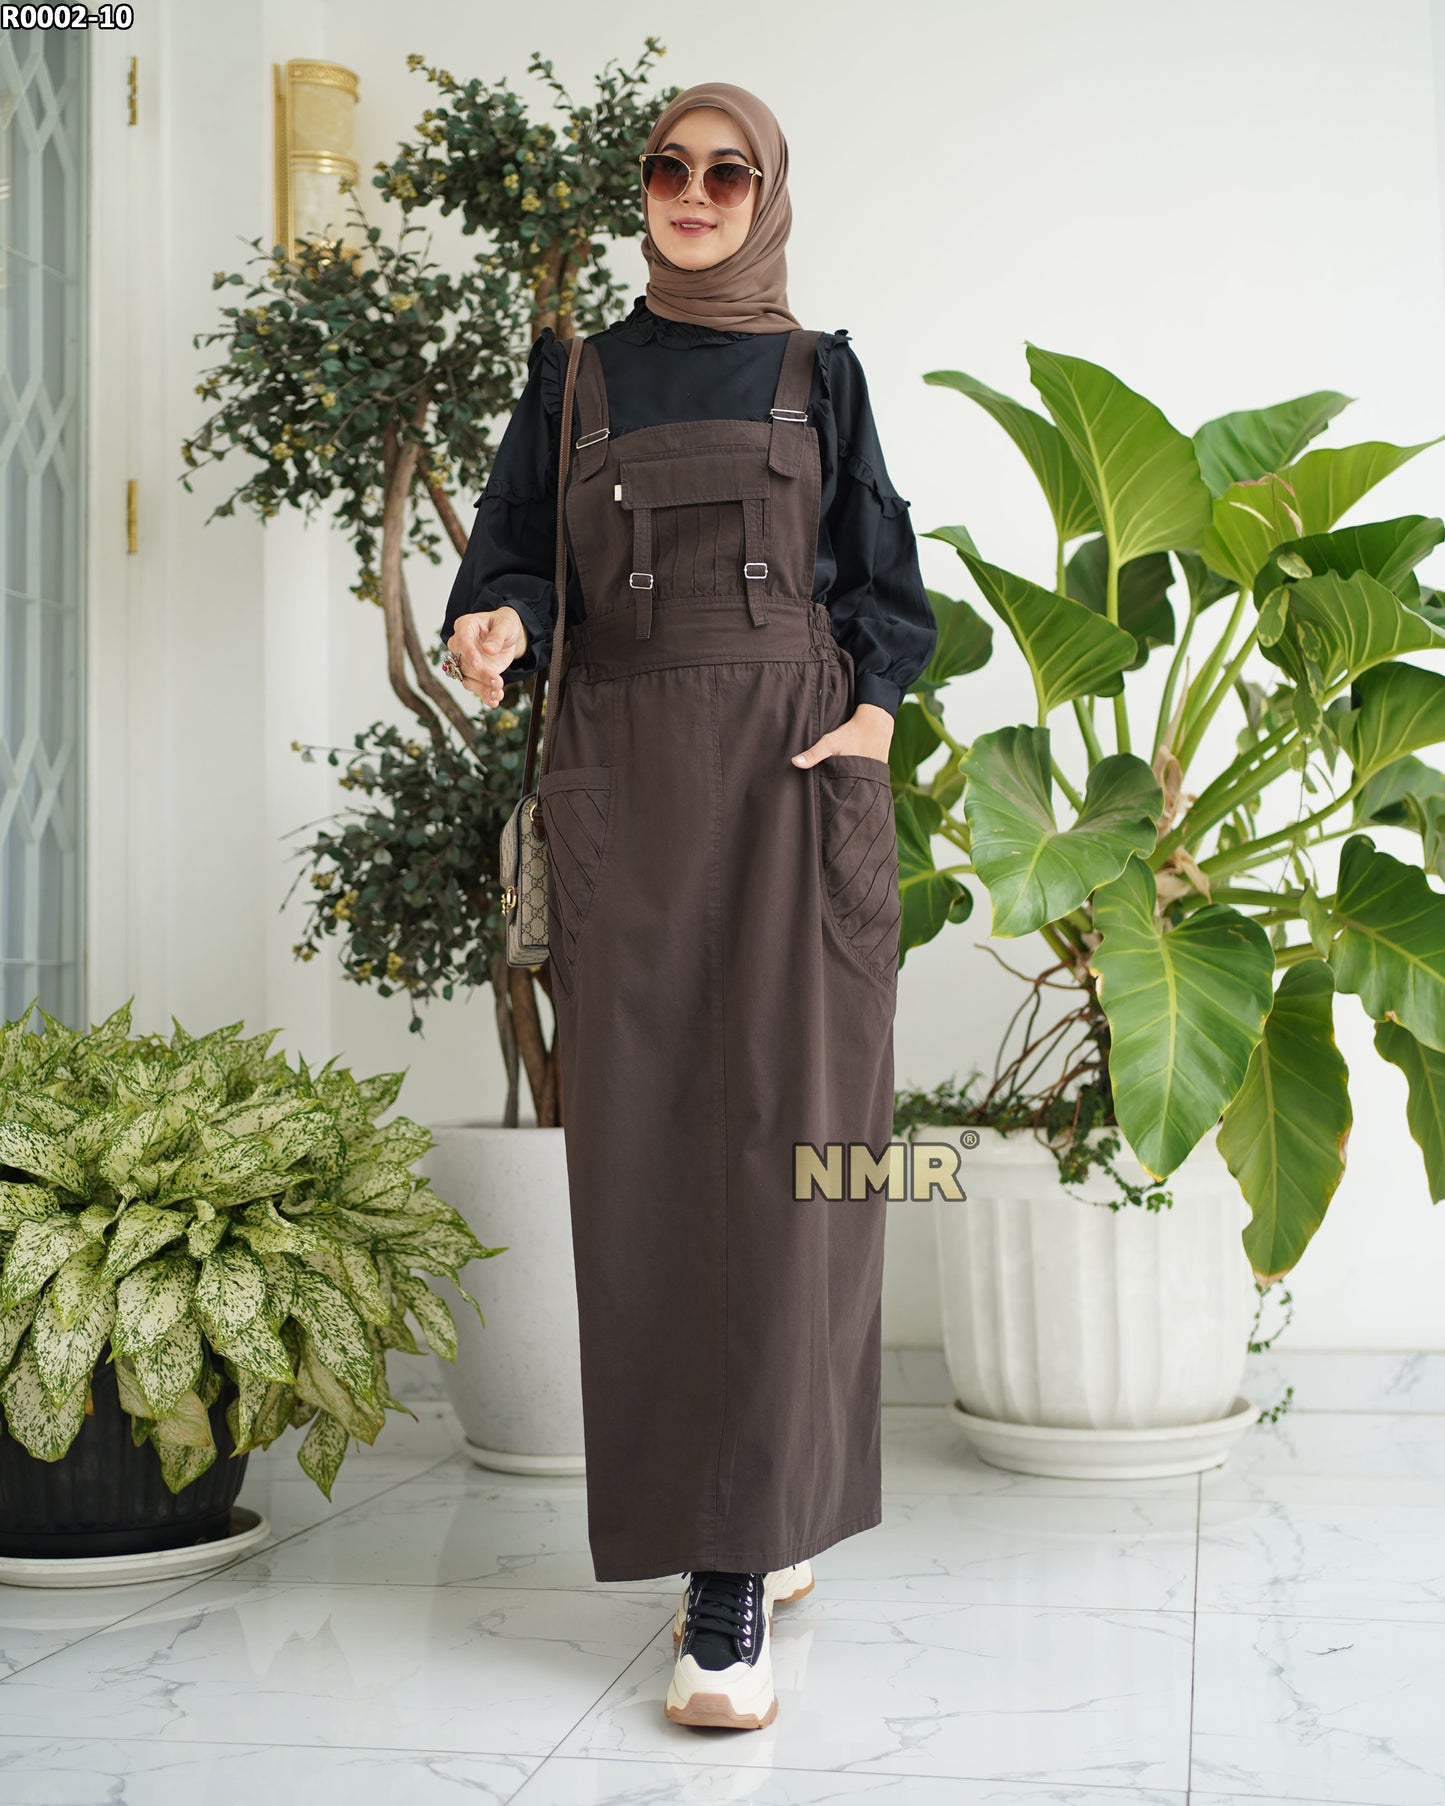 NMR Gamis Jumpsuit Overall Baby Canvas Vol R002-10